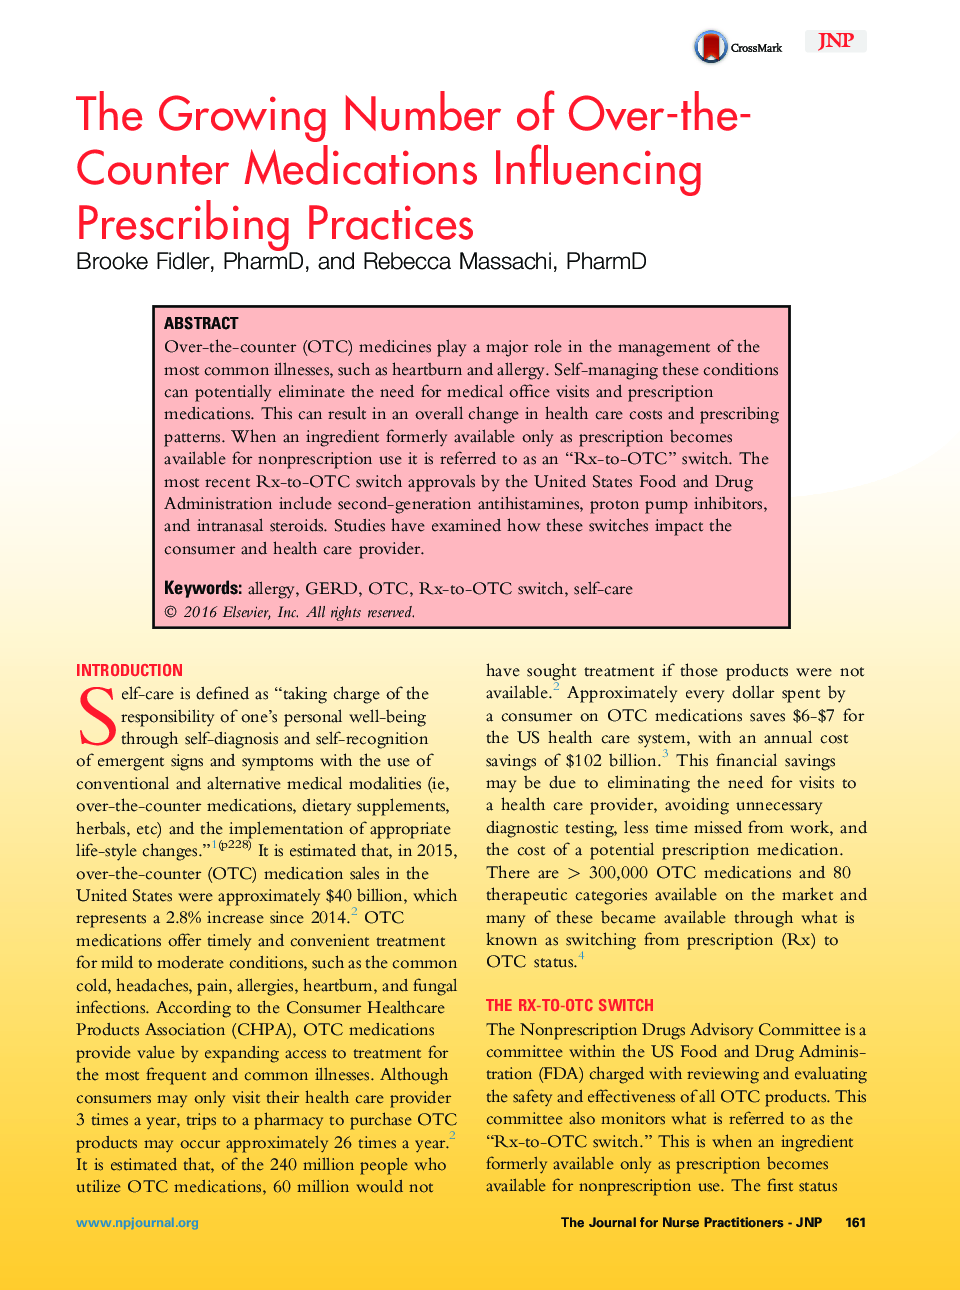 The Growing Number of Over-the-Counter Medications Influencing Prescribing Practices 